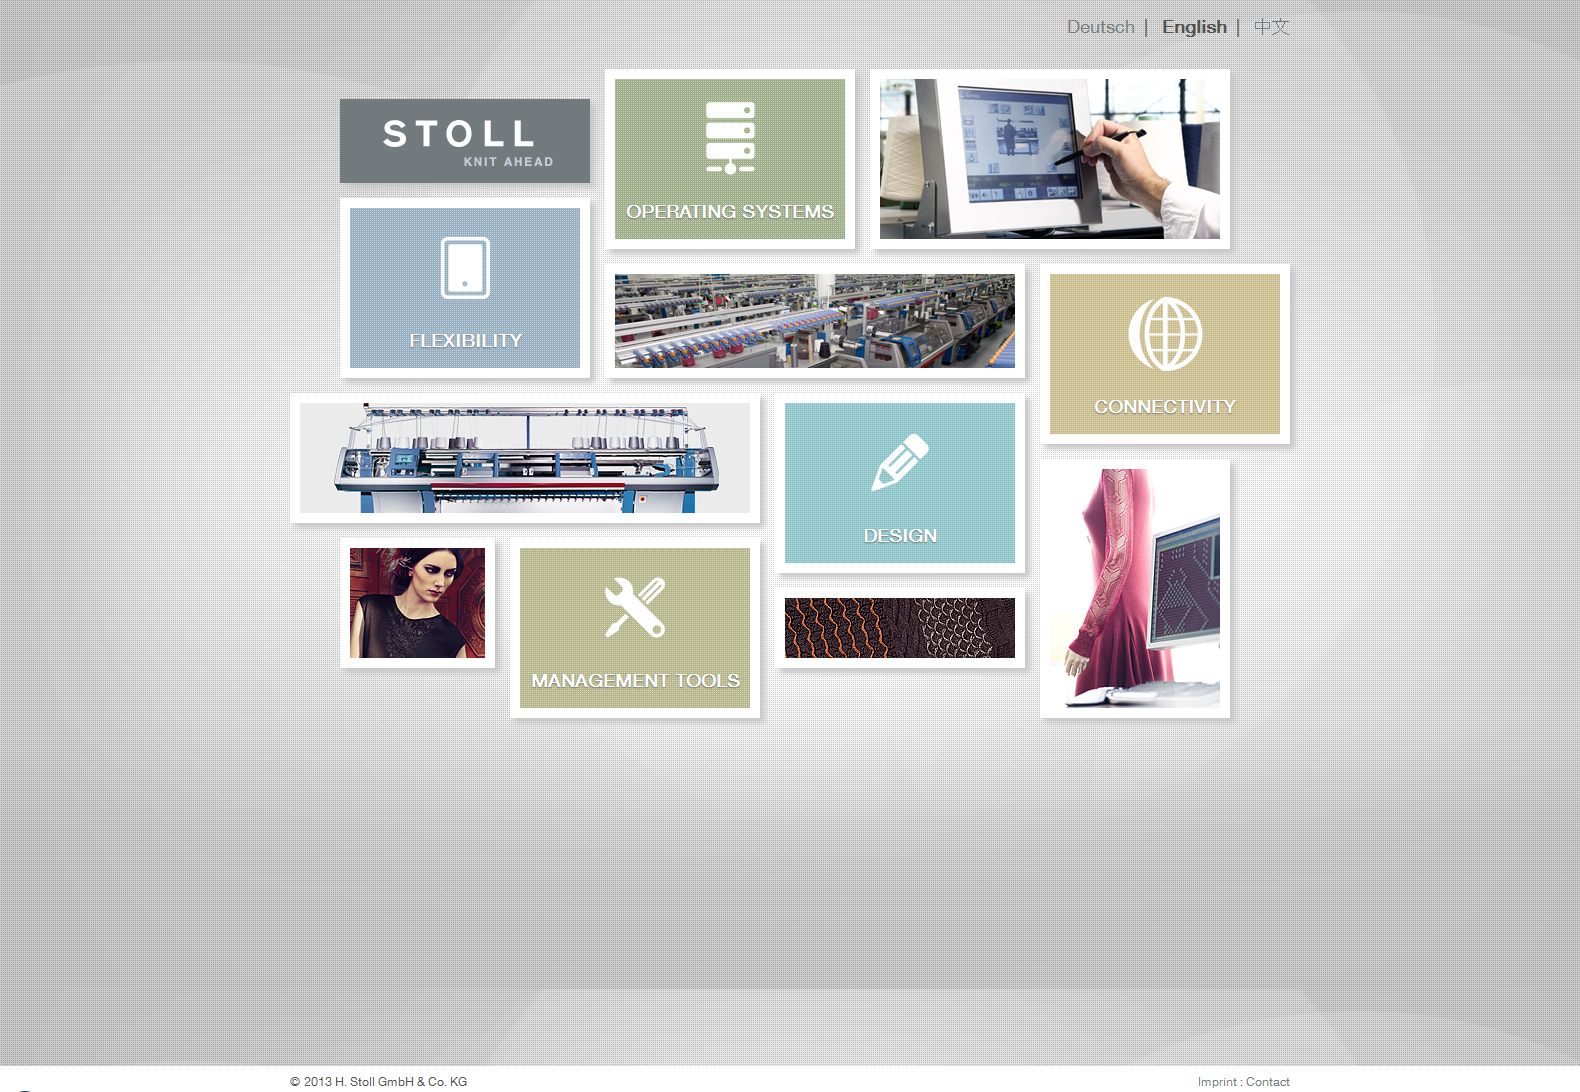 Stoll Softwaere Solutions microsite screen